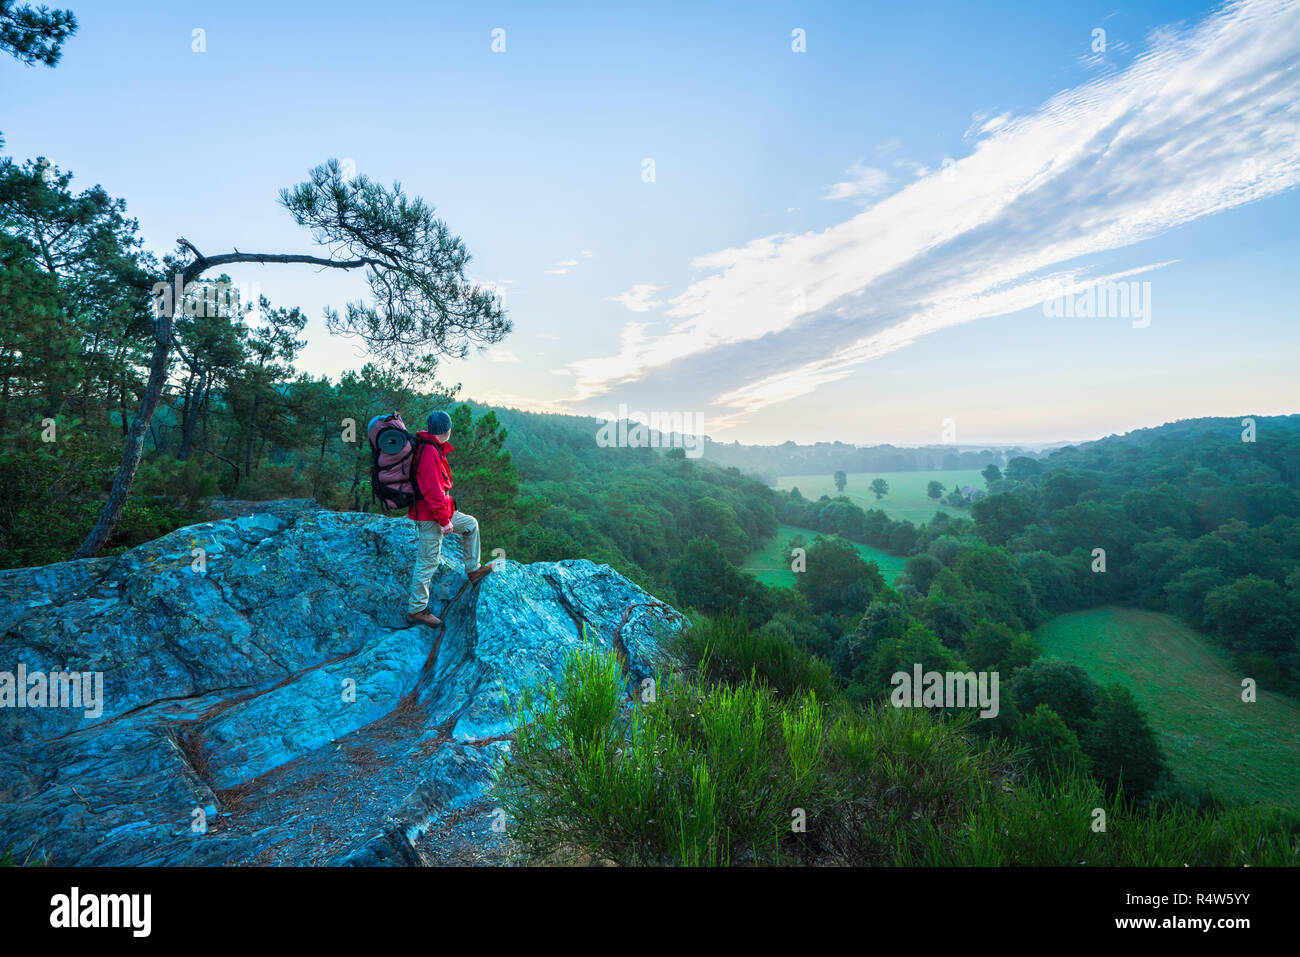 A man hiking on a mountain trail looks down the valley Stock Photo